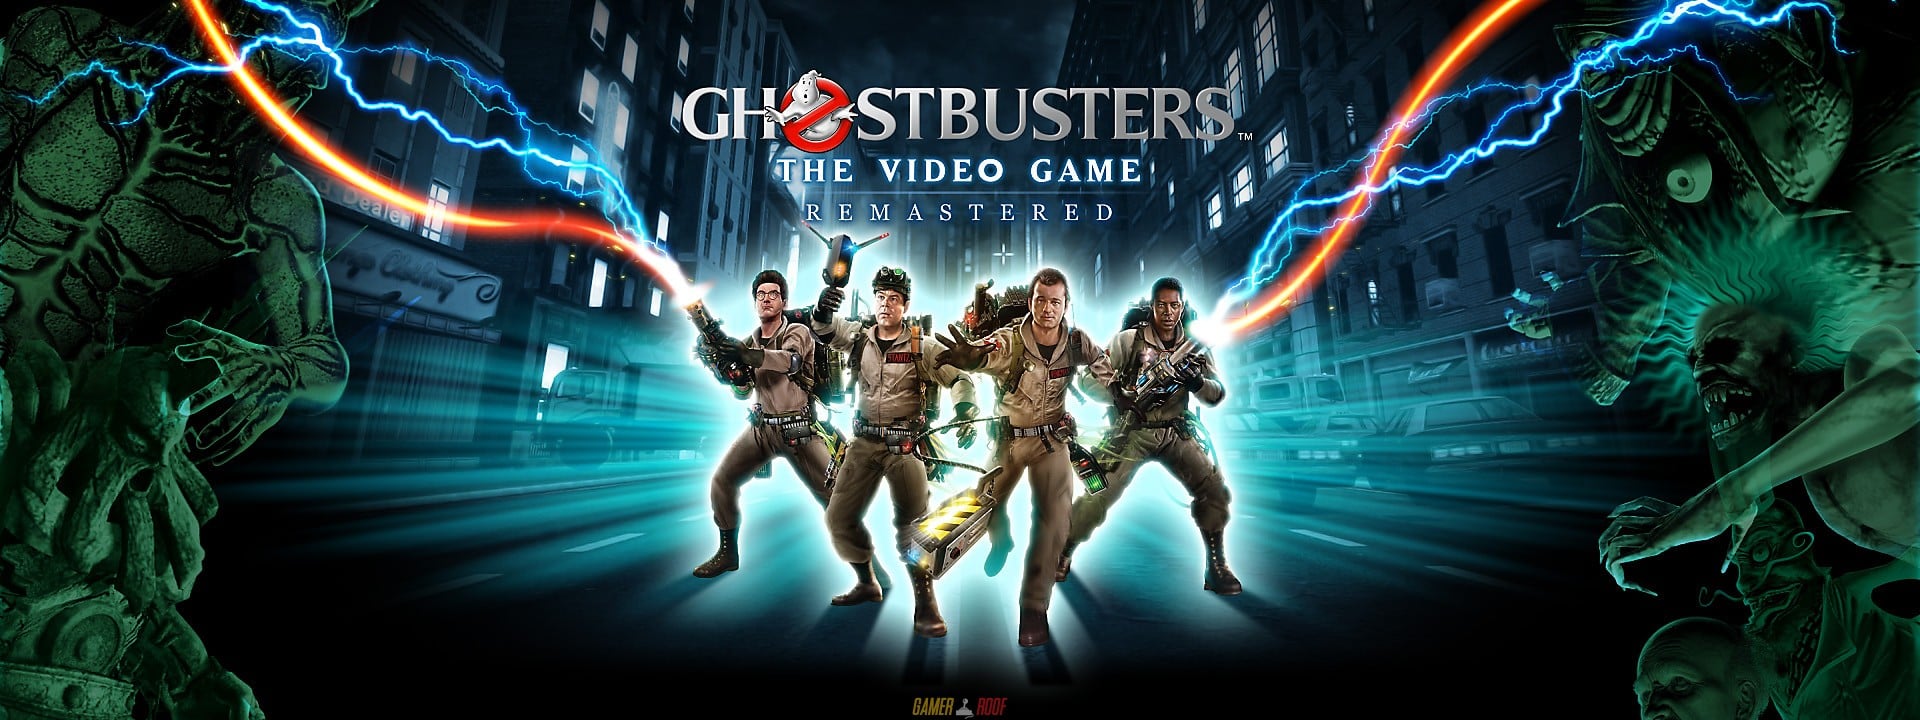 Ghostbuster Games For Free